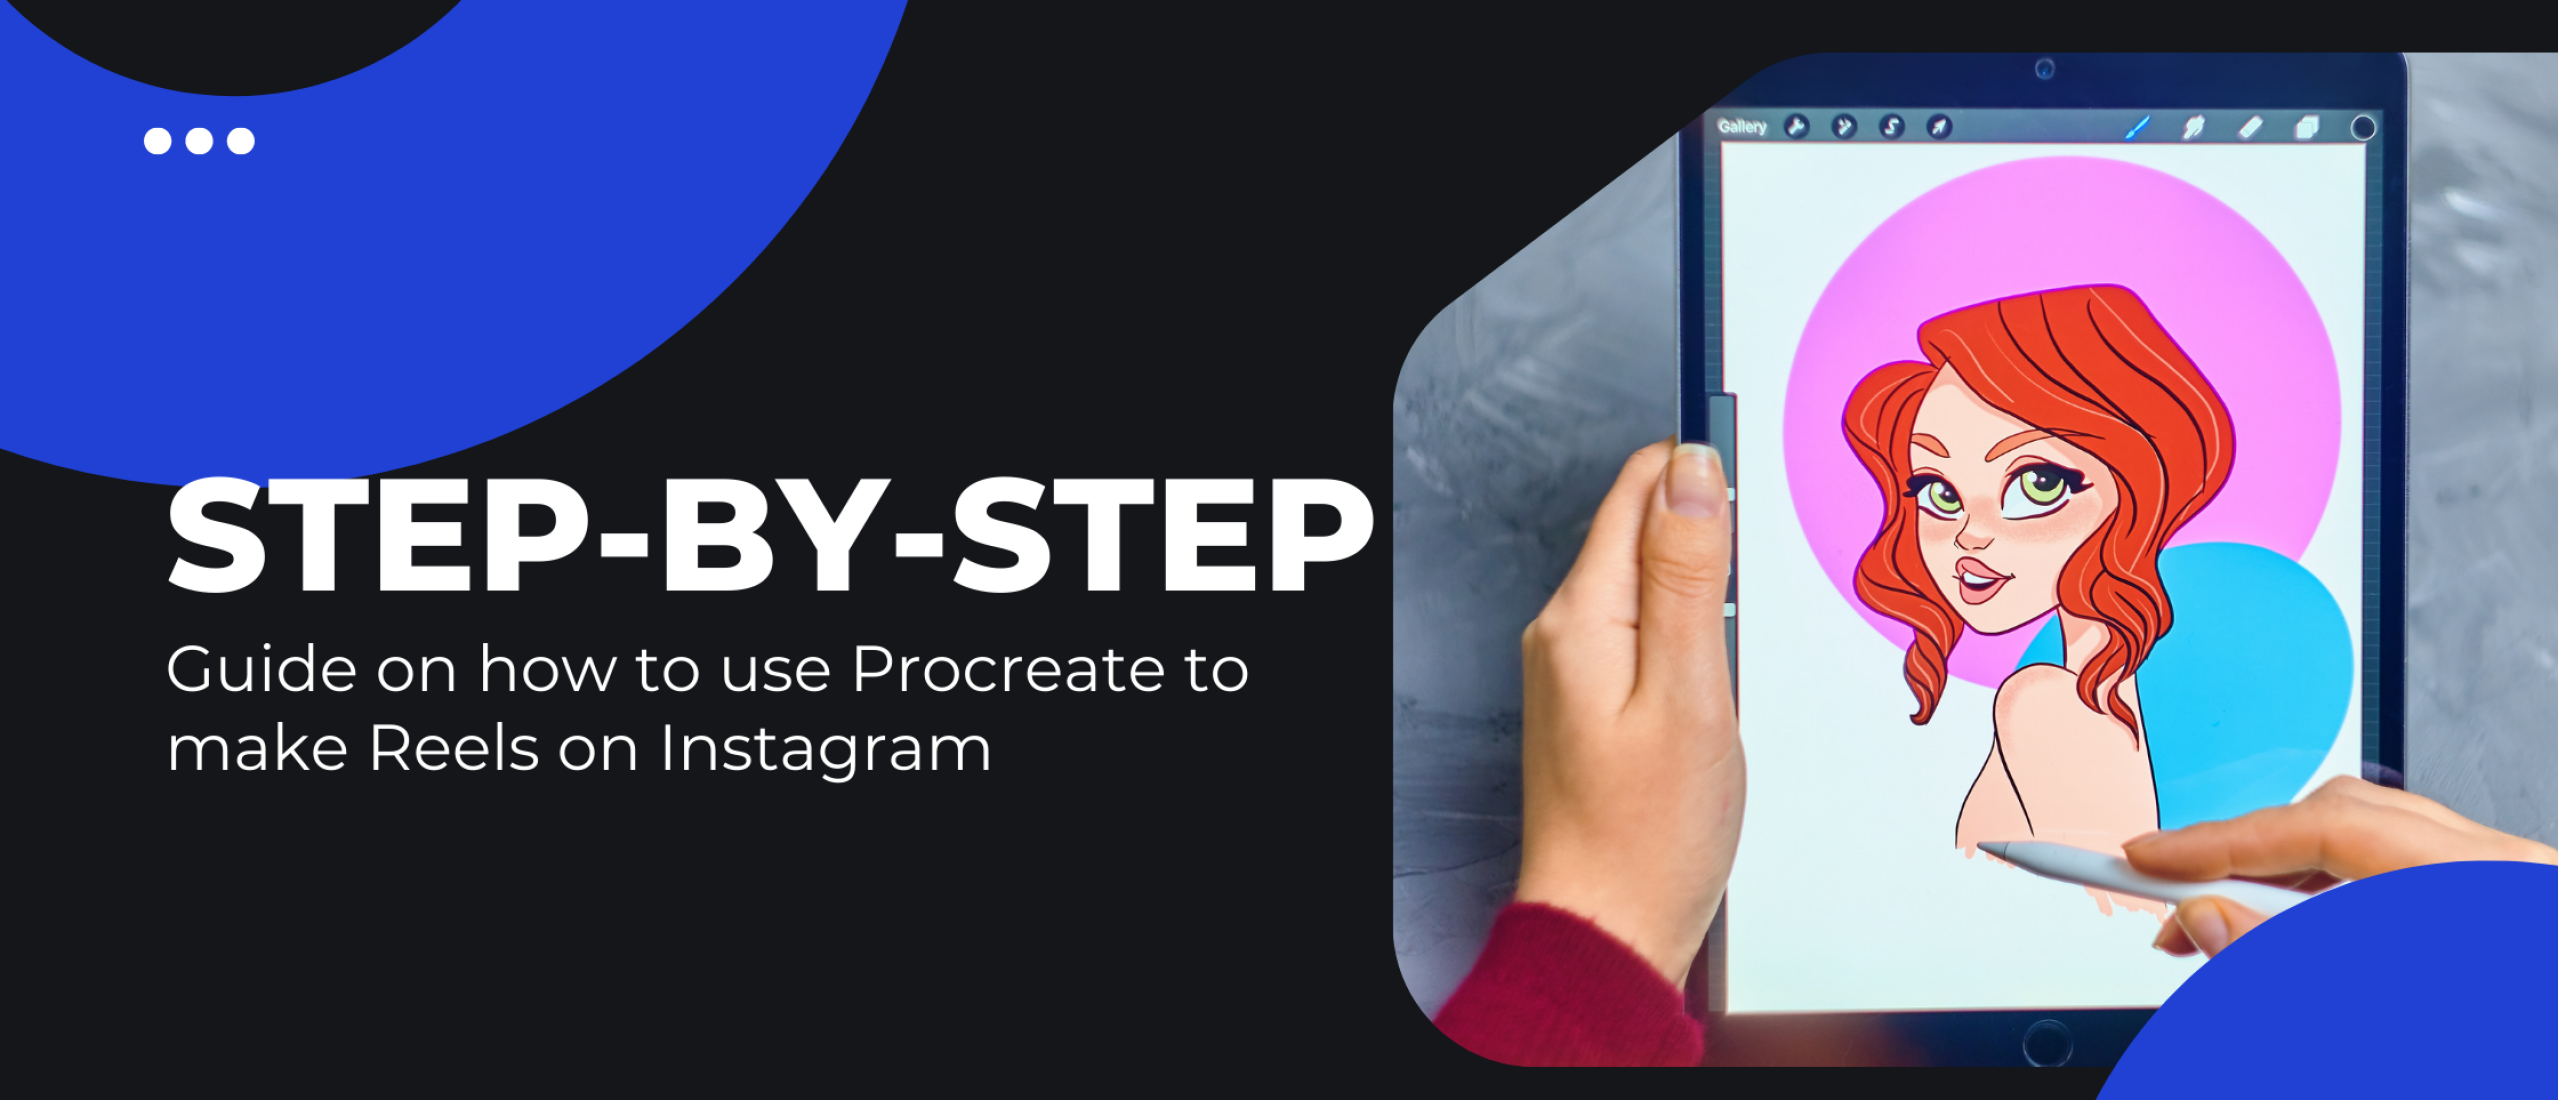 step-by-step guide on how to use Procreate for tattoo reels on Instagram.